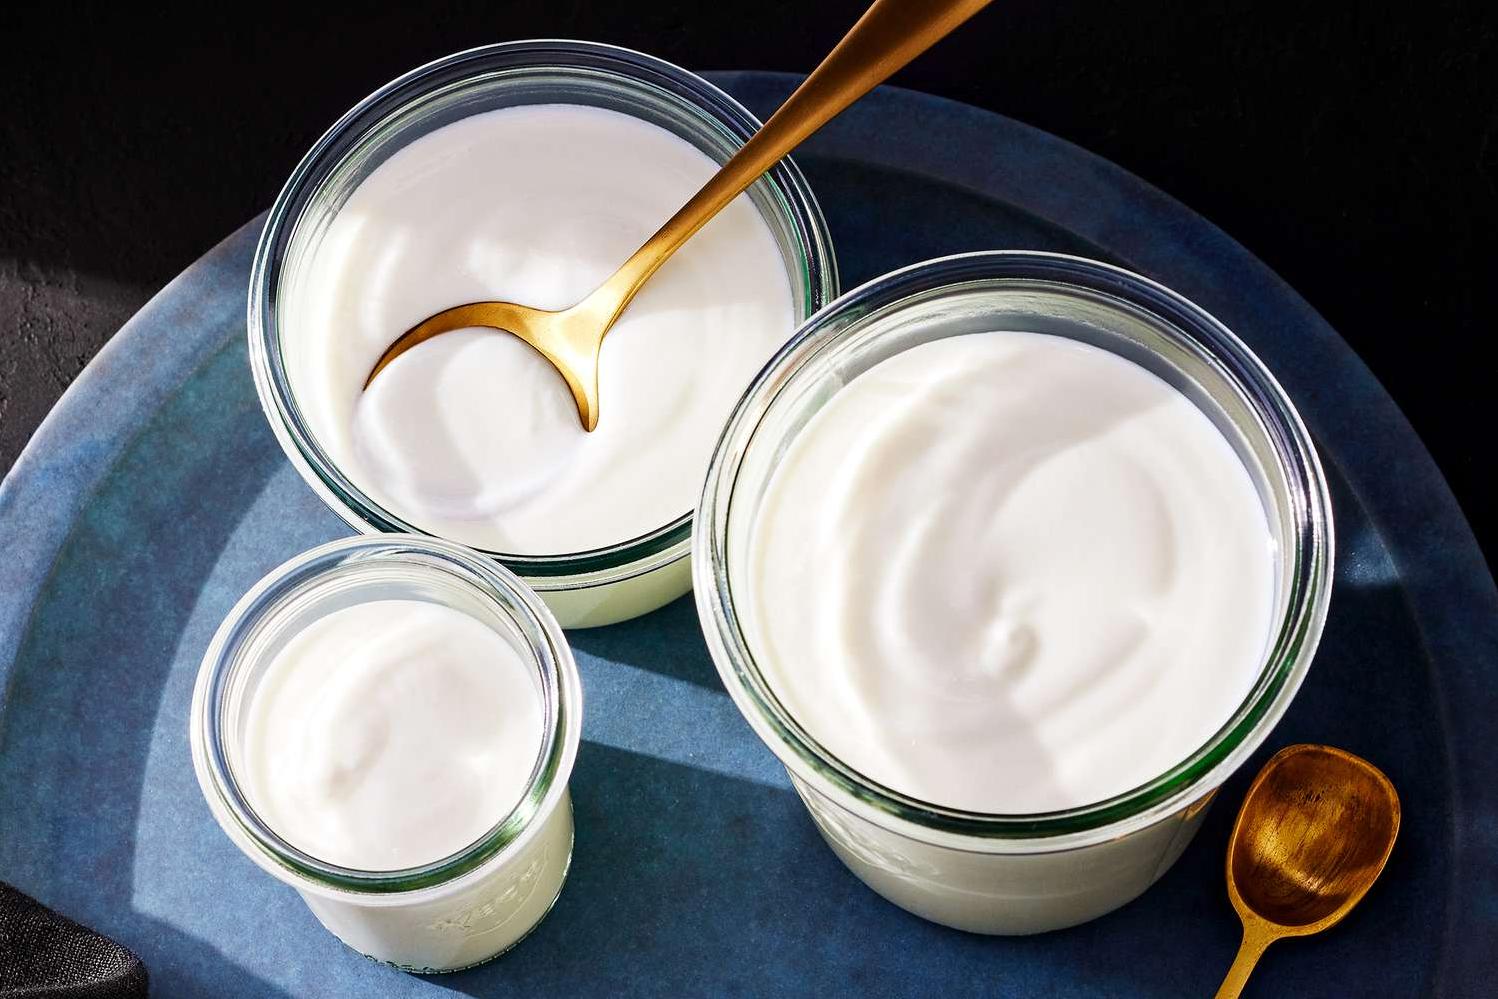  One bite of this yogurt and you'll be hooked on the unique flavor.